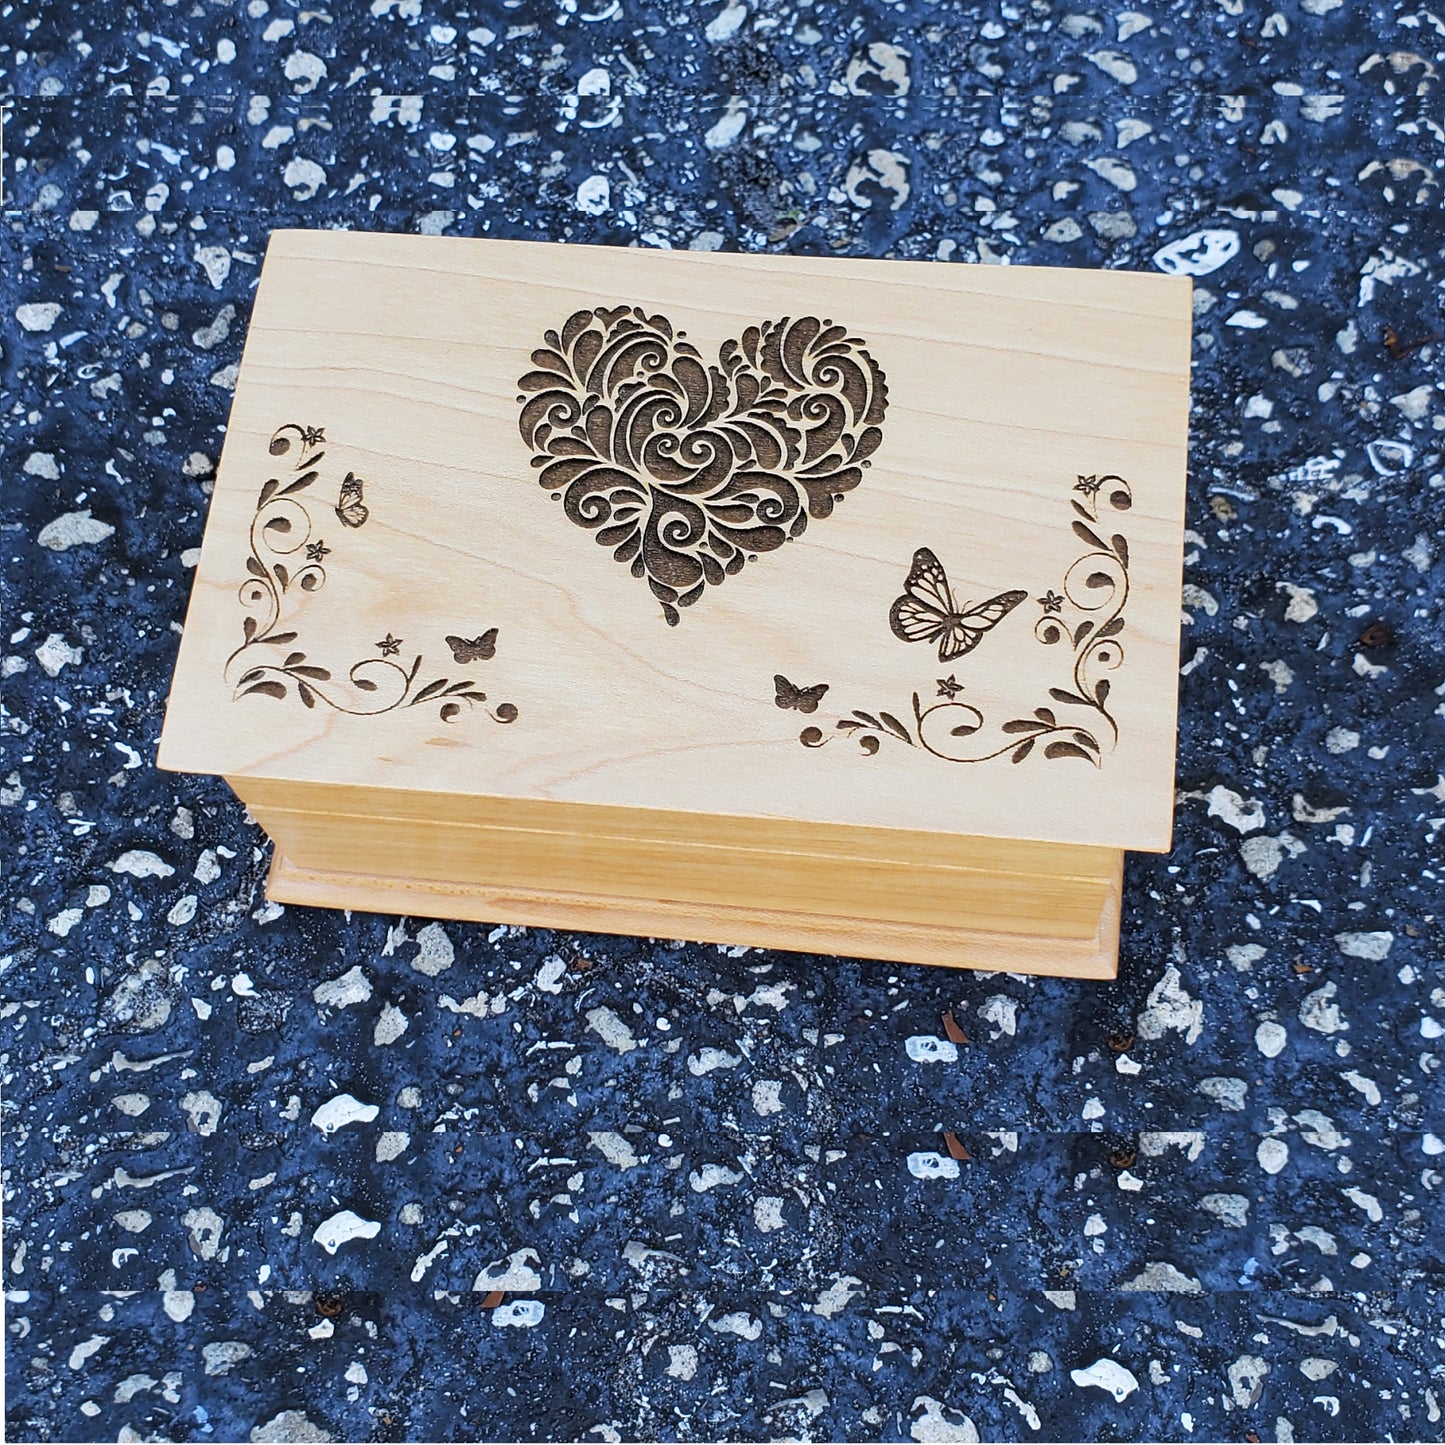 Heart and Butterfly Jewelry Box with music player inside